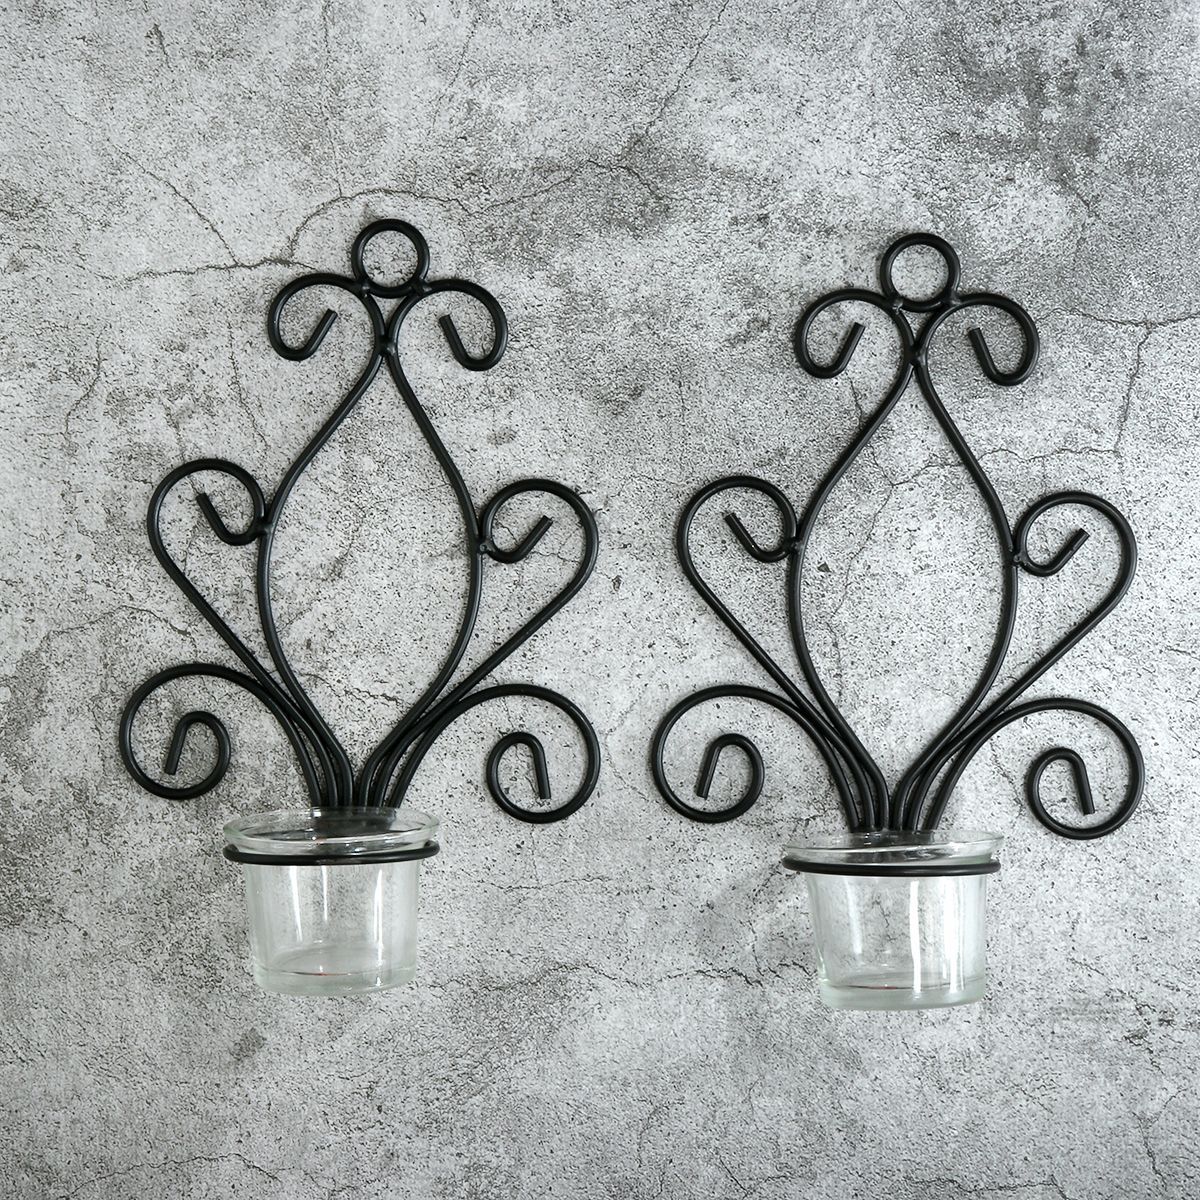 2-Pack-Metal-Iron-Candlestick-Wall-Hanging-Candle-Holder-Home-Decor-Ornaments-1683329